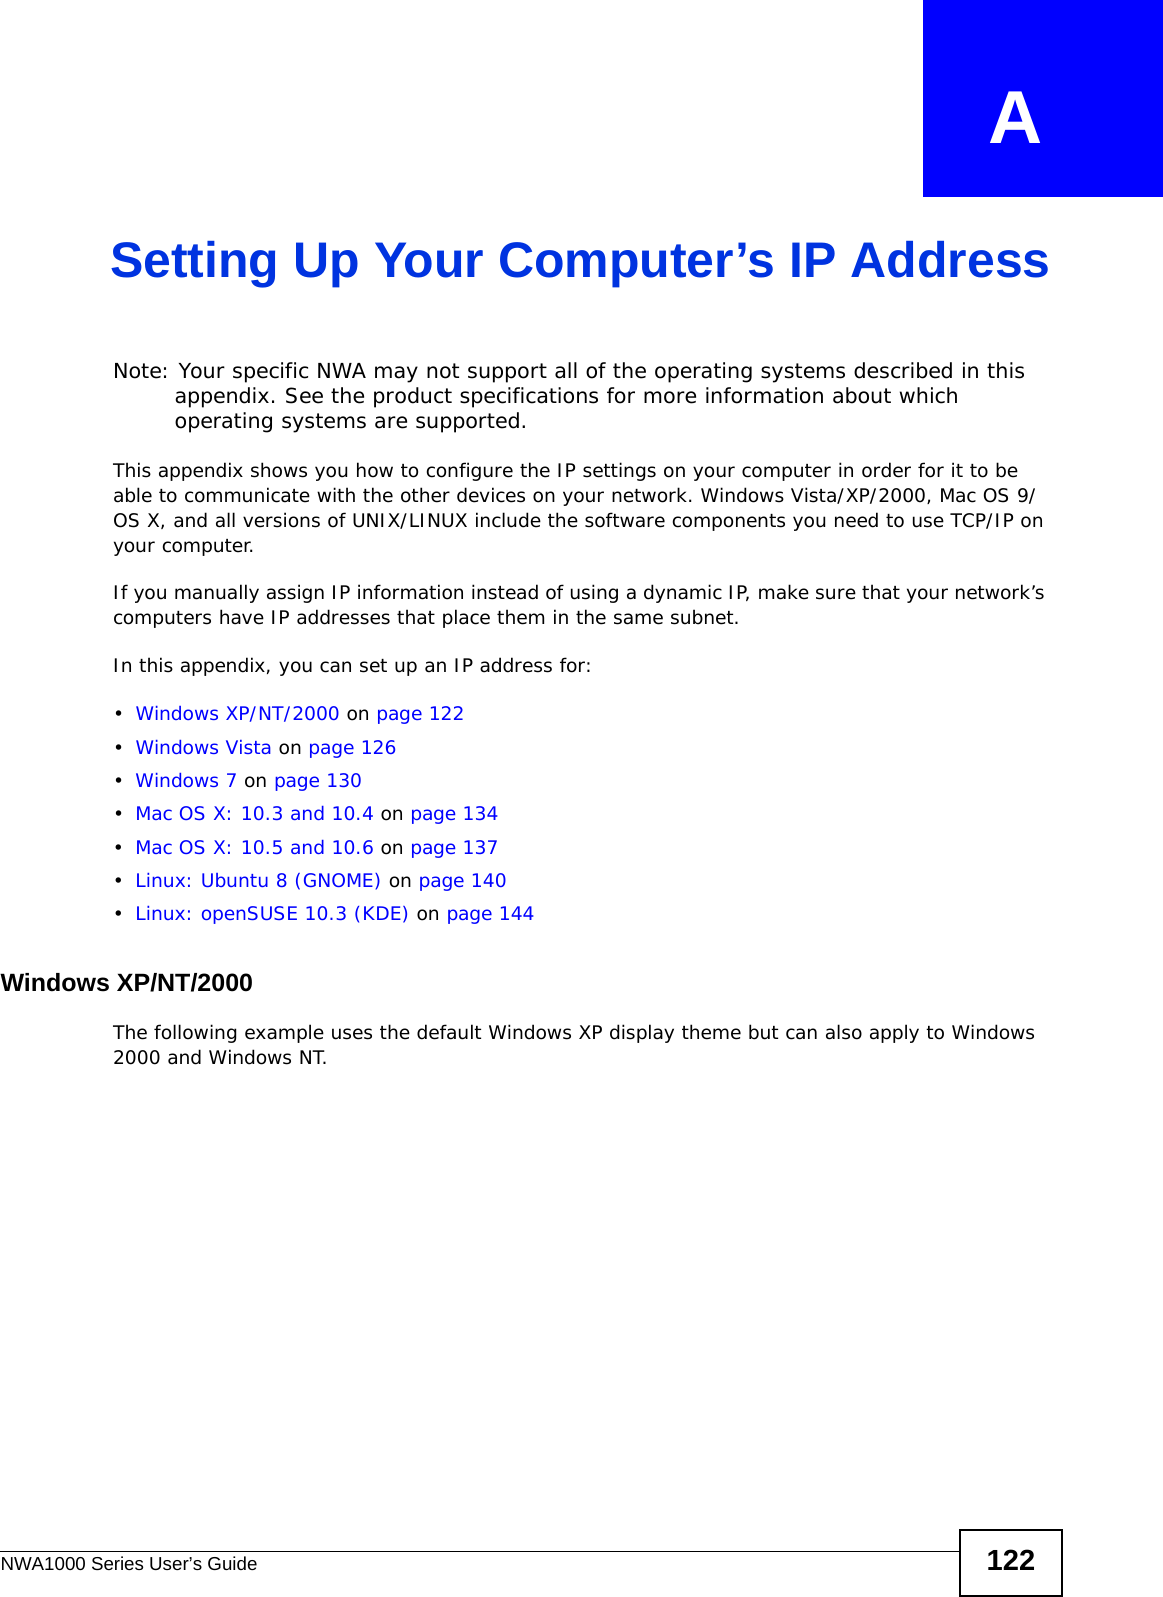 NWA1000 Series User’s Guide 122APPENDIX   ASetting Up Your Computer’s IP AddressNote: Your specific NWA may not support all of the operating systems described in this appendix. See the product specifications for more information about which operating systems are supported.This appendix shows you how to configure the IP settings on your computer in order for it to be able to communicate with the other devices on your network. Windows Vista/XP/2000, Mac OS 9/OS X, and all versions of UNIX/LINUX include the software components you need to use TCP/IP on your computer. If you manually assign IP information instead of using a dynamic IP, make sure that your network’s computers have IP addresses that place them in the same subnet.In this appendix, you can set up an IP address for:•Windows XP/NT/2000 on page 122•Windows Vista on page 126•Windows 7 on page 130•Mac OS X: 10.3 and 10.4 on page 134•Mac OS X: 10.5 and 10.6 on page 137•Linux: Ubuntu 8 (GNOME) on page 140•Linux: openSUSE 10.3 (KDE) on page 144Windows XP/NT/2000The following example uses the default Windows XP display theme but can also apply to Windows 2000 and Windows NT.